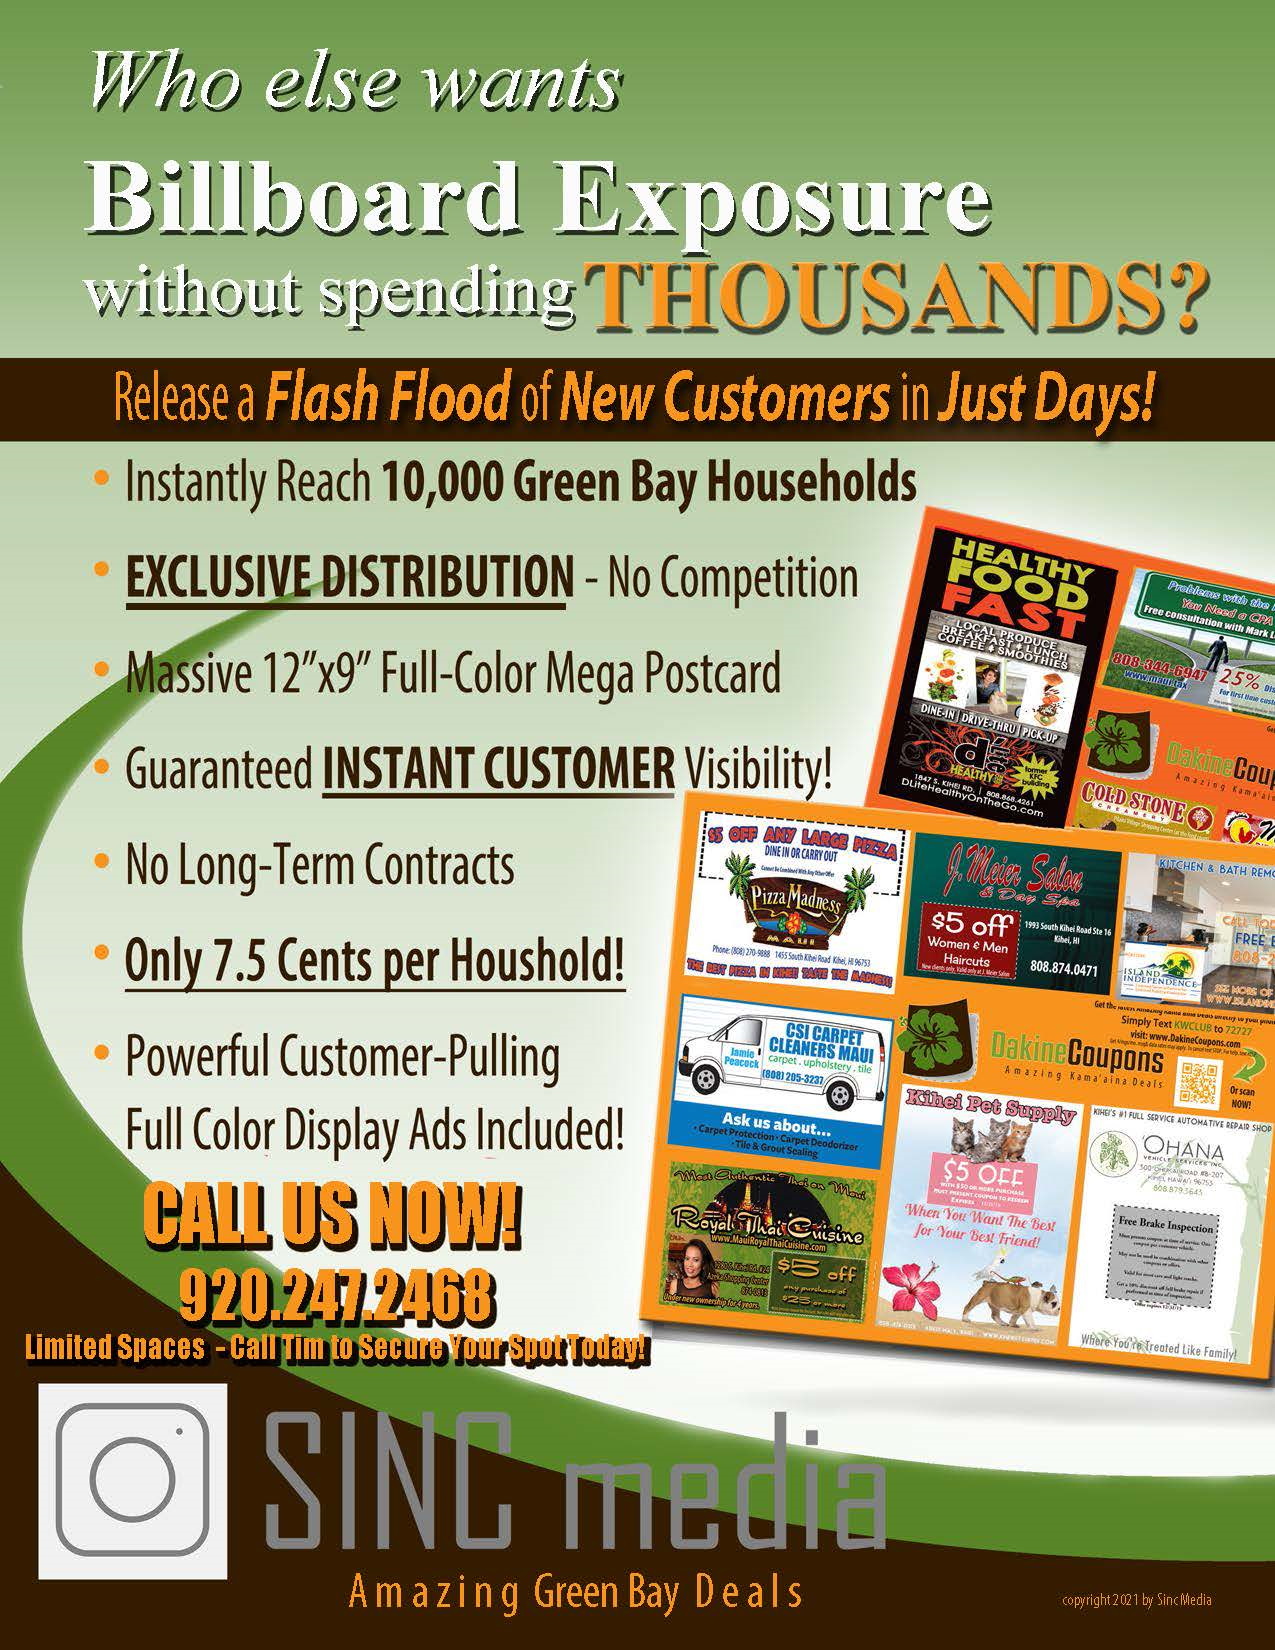 Who wants billboard exposure without spending thousands